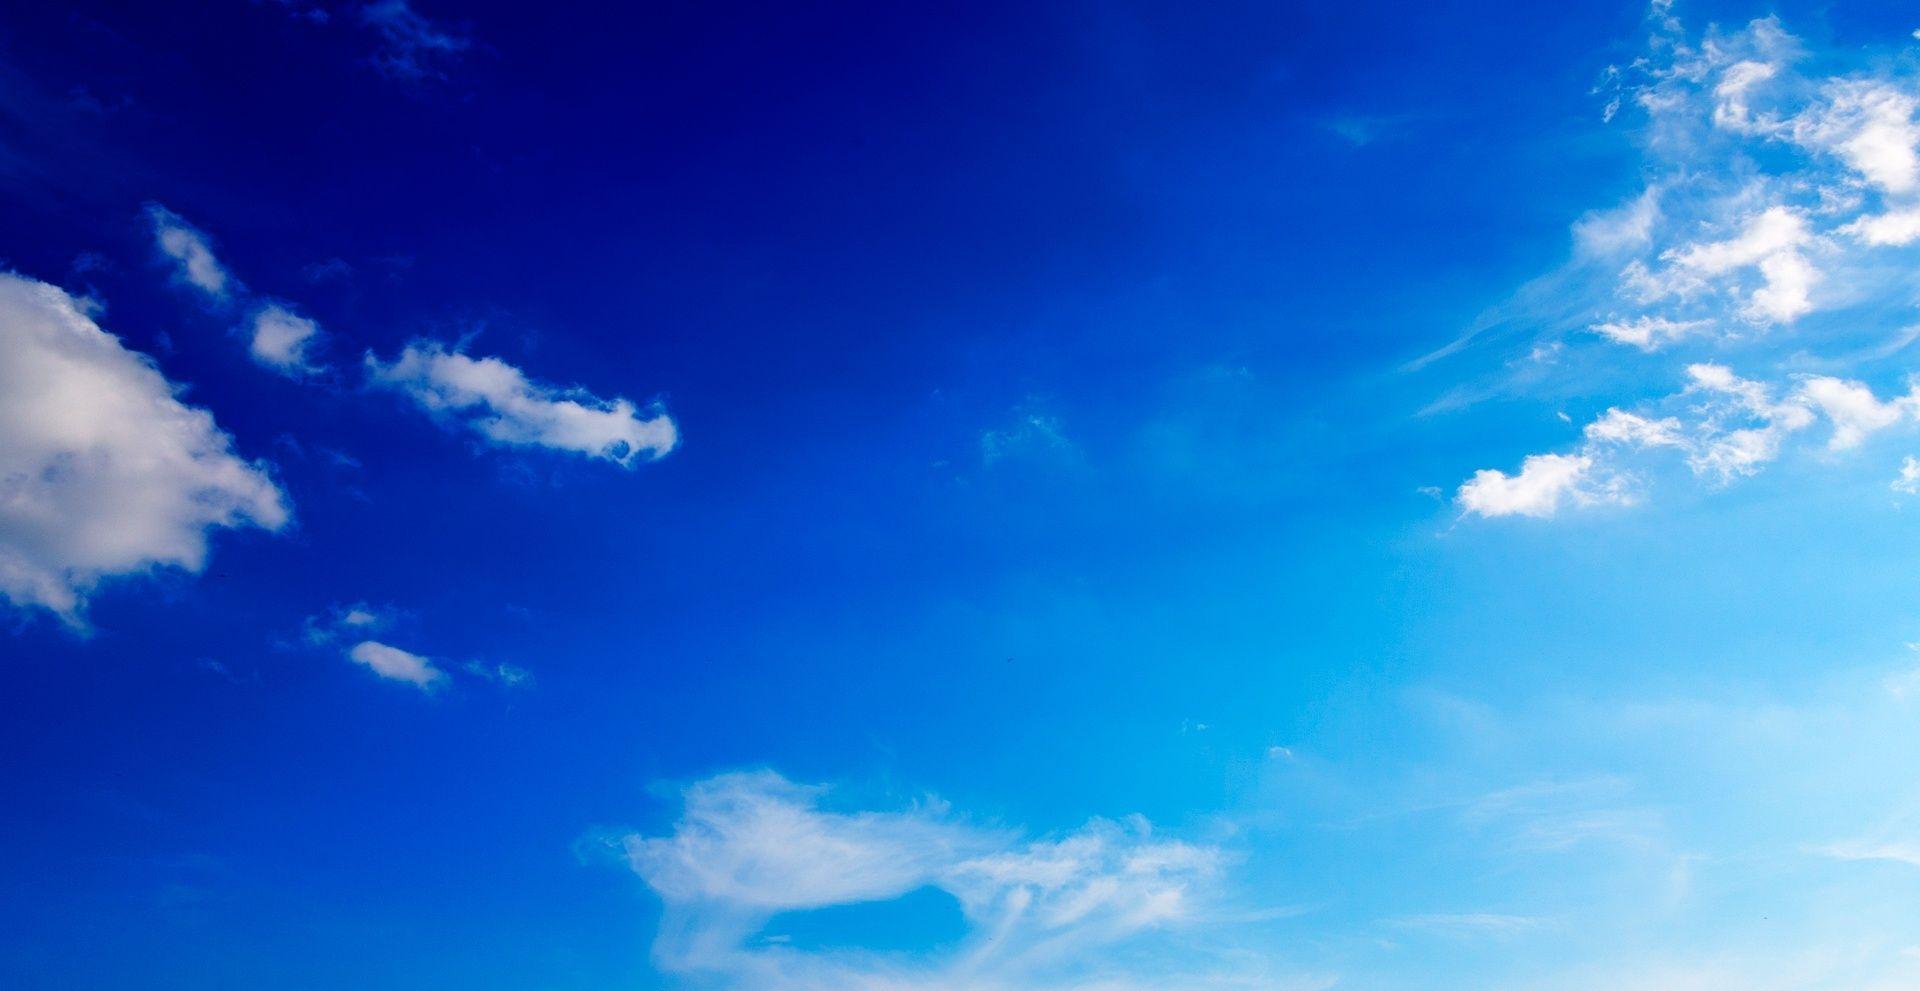 Sky Blue Background 1920x991. Download wallpaper page